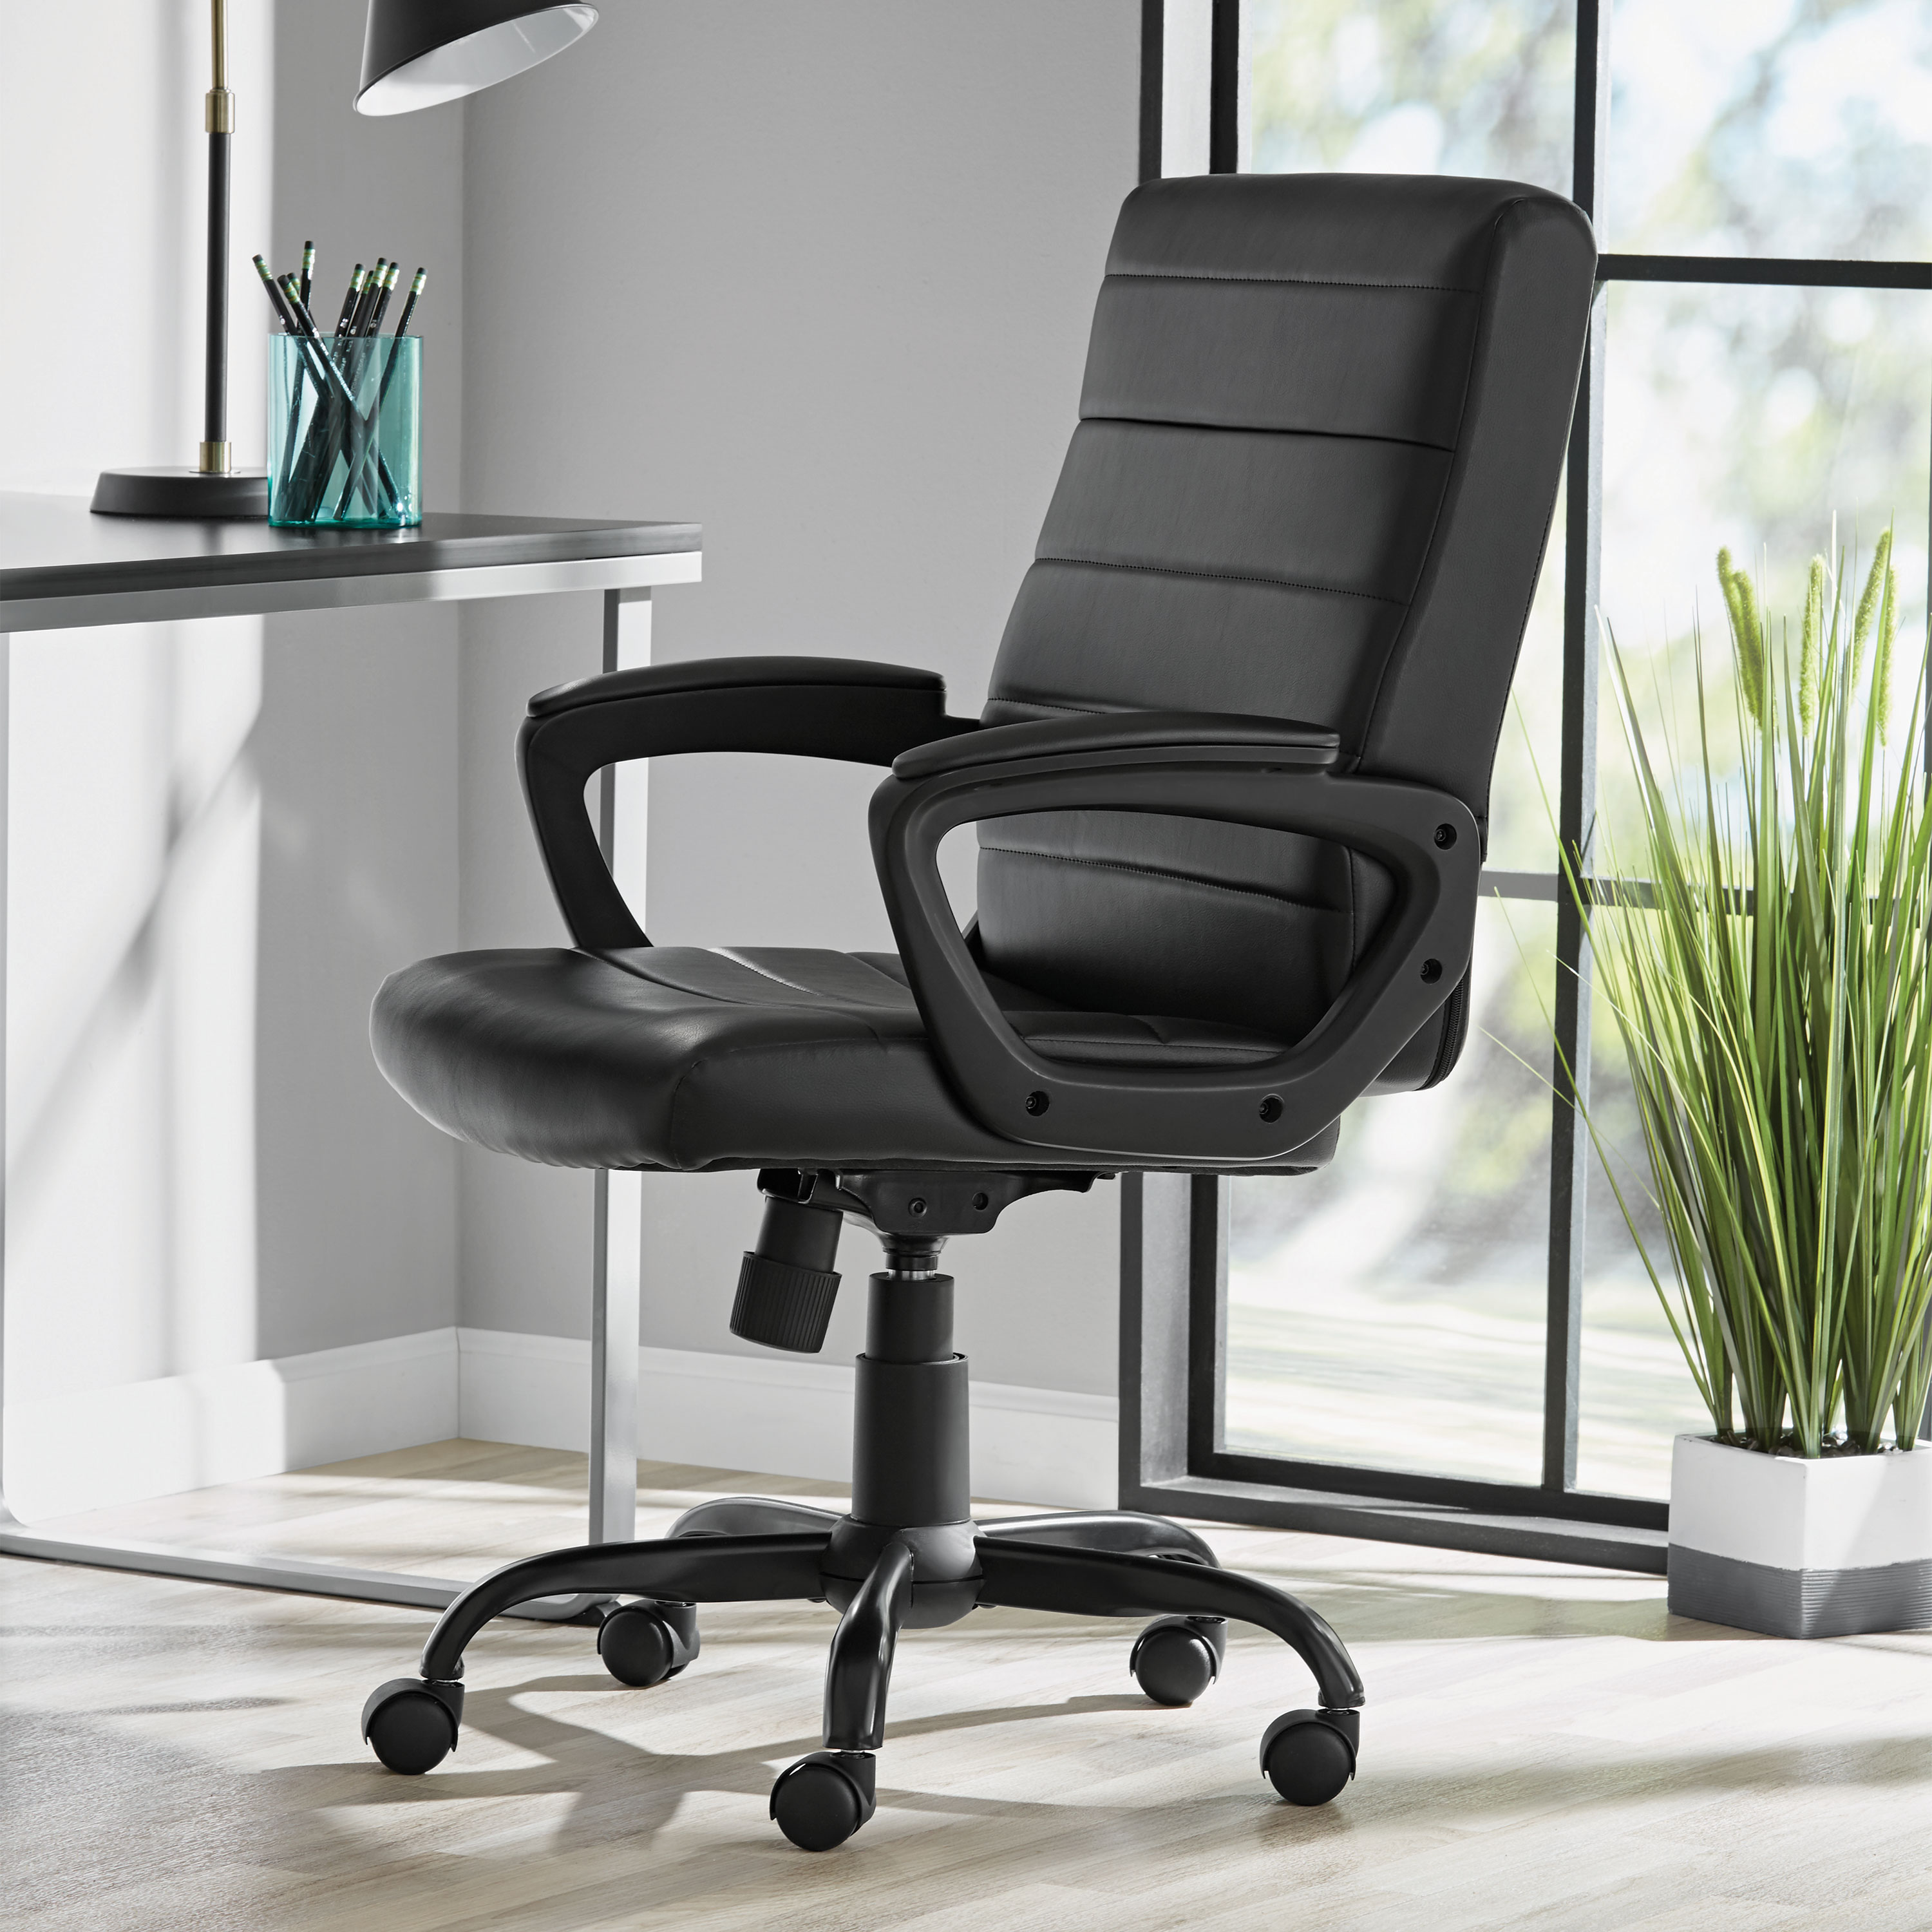 Mainstays Bonded Leather Mid-Back Manager's Office Chair, Black - image 1 of 13